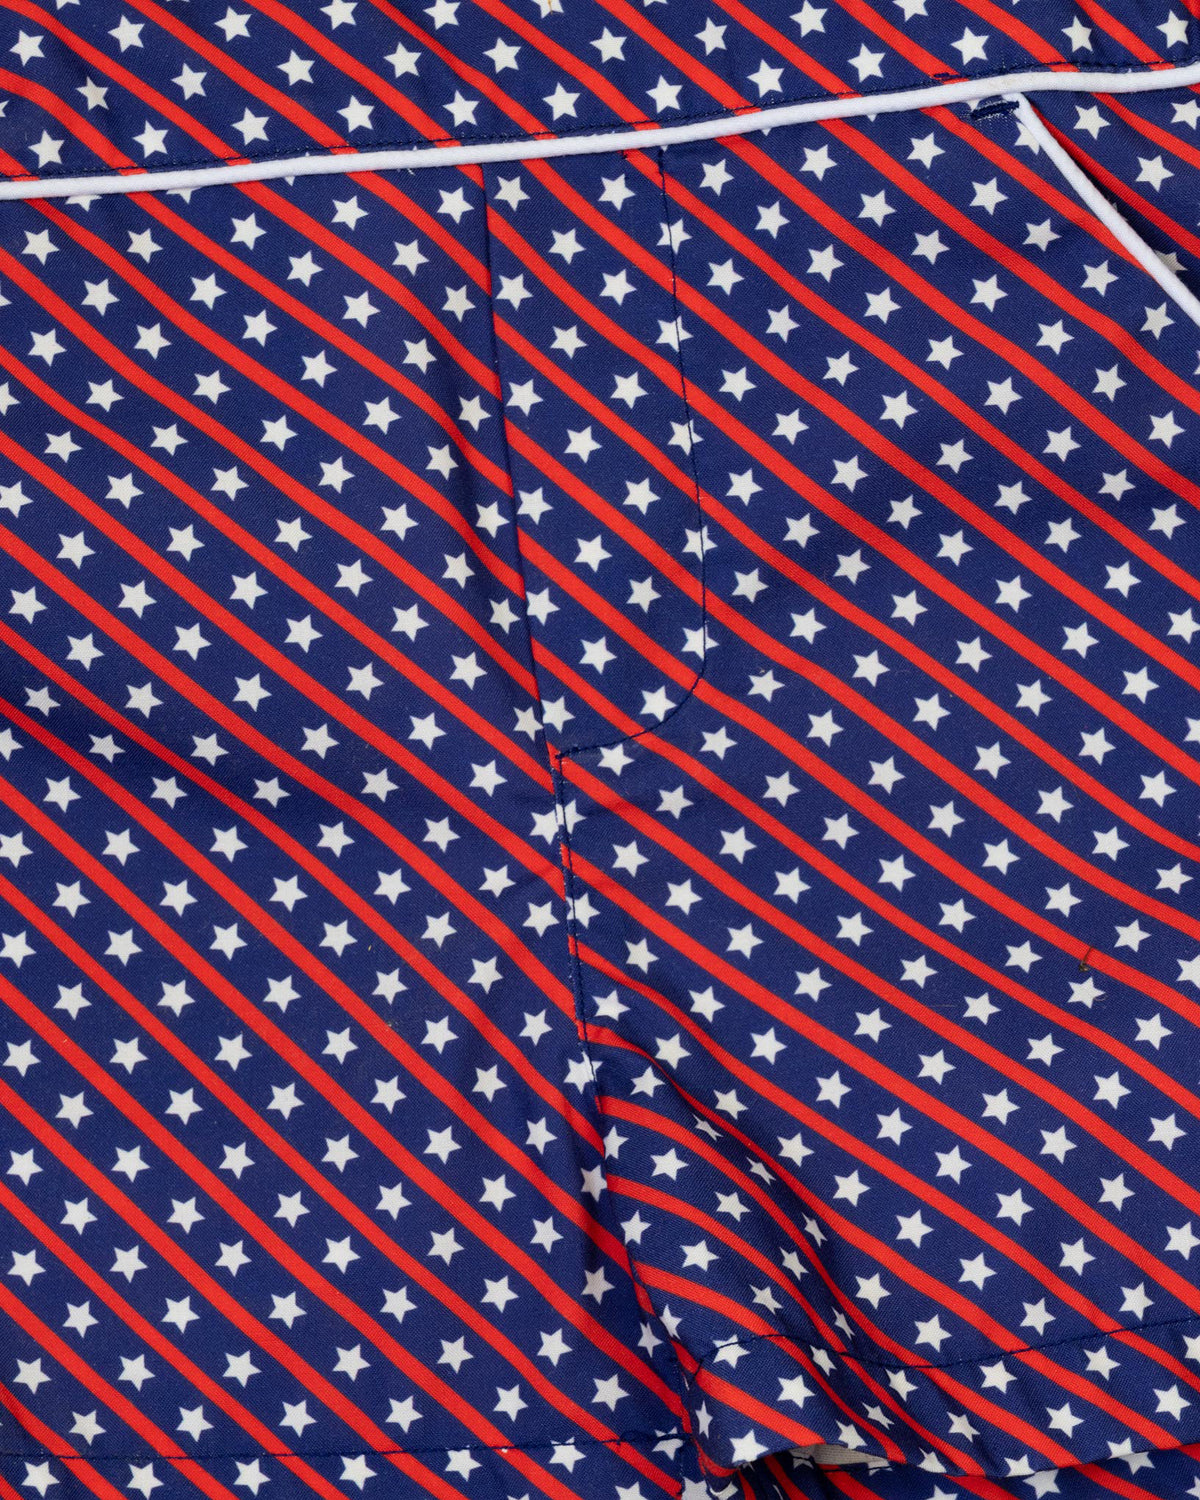 Stars and Stripes Shorts-FINAL SALE